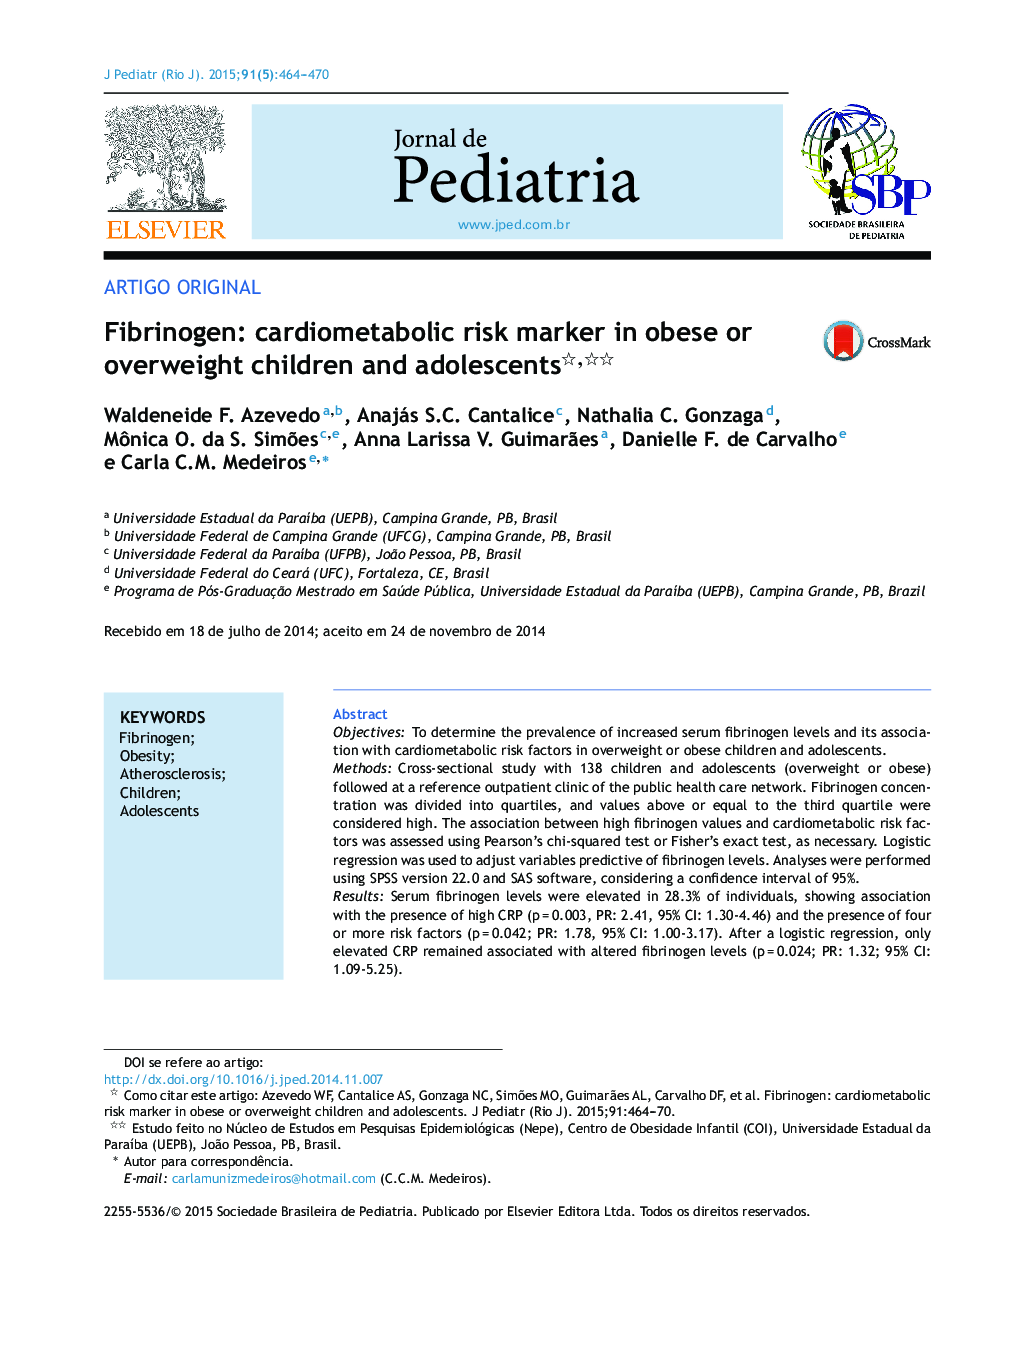 Fibrinogen: cardiometabolic risk marker in obese or overweight children and adolescents 